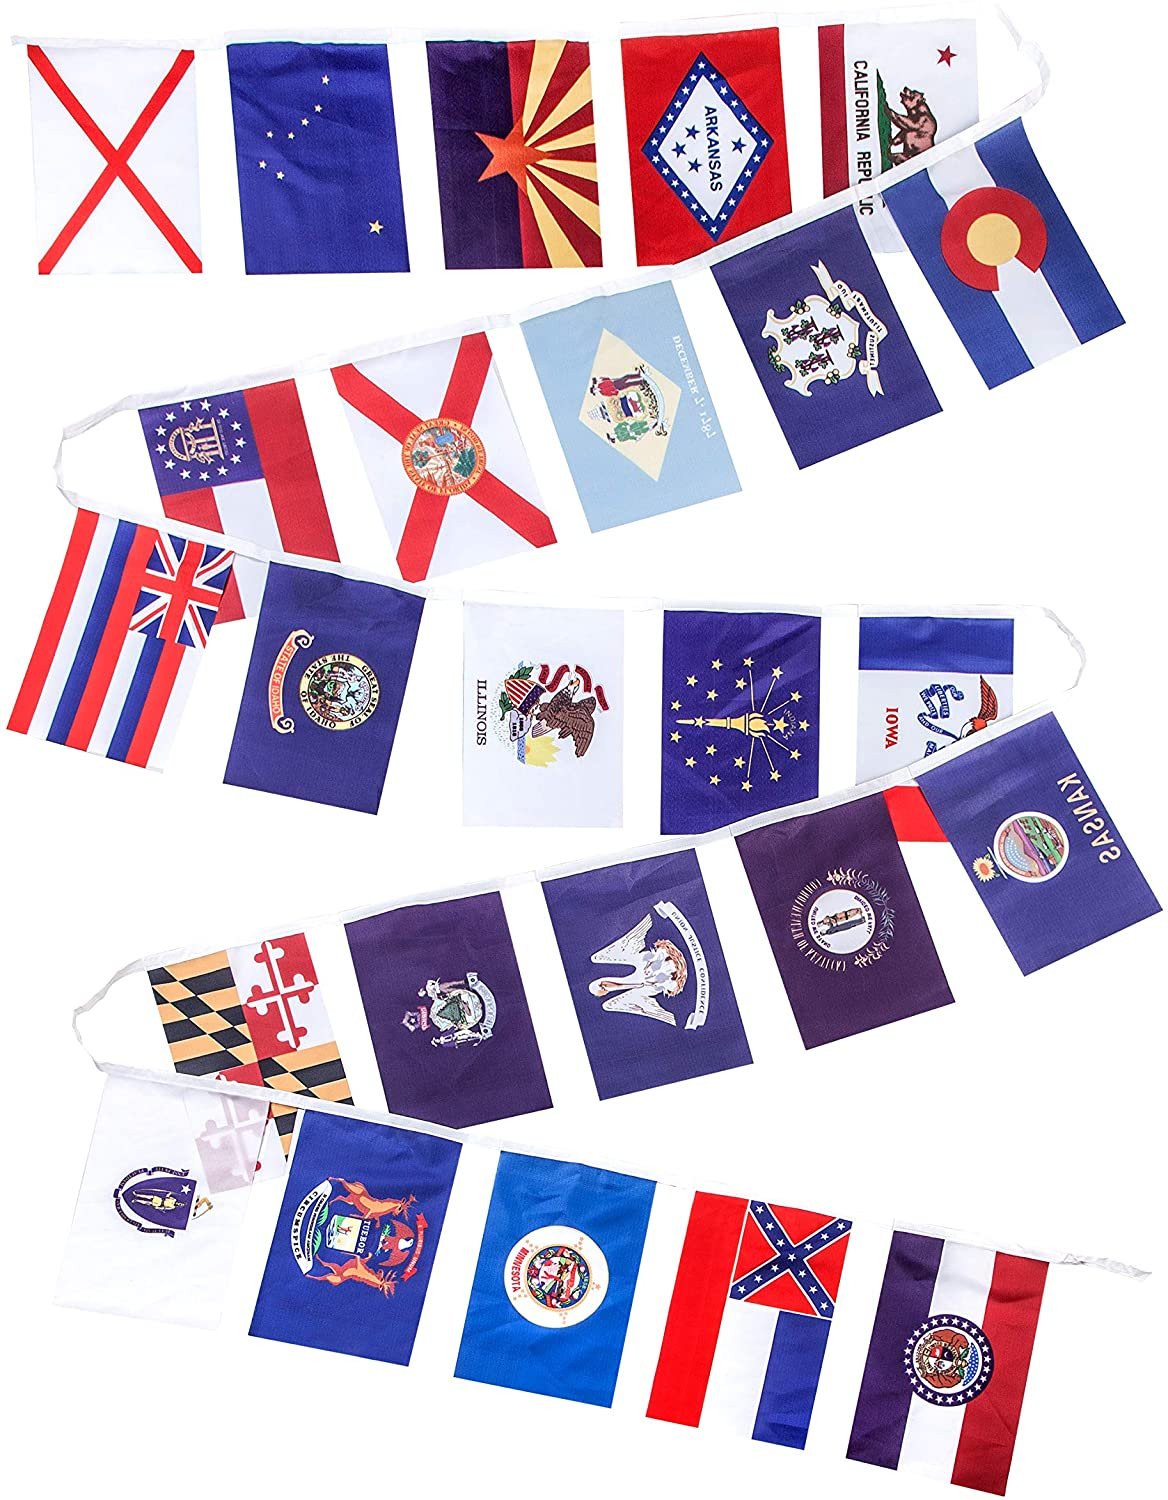 Quarterhouse American State Flags - 25 States (Alabama-Missouri) Per String - Polyester, 8 x 12 Inches